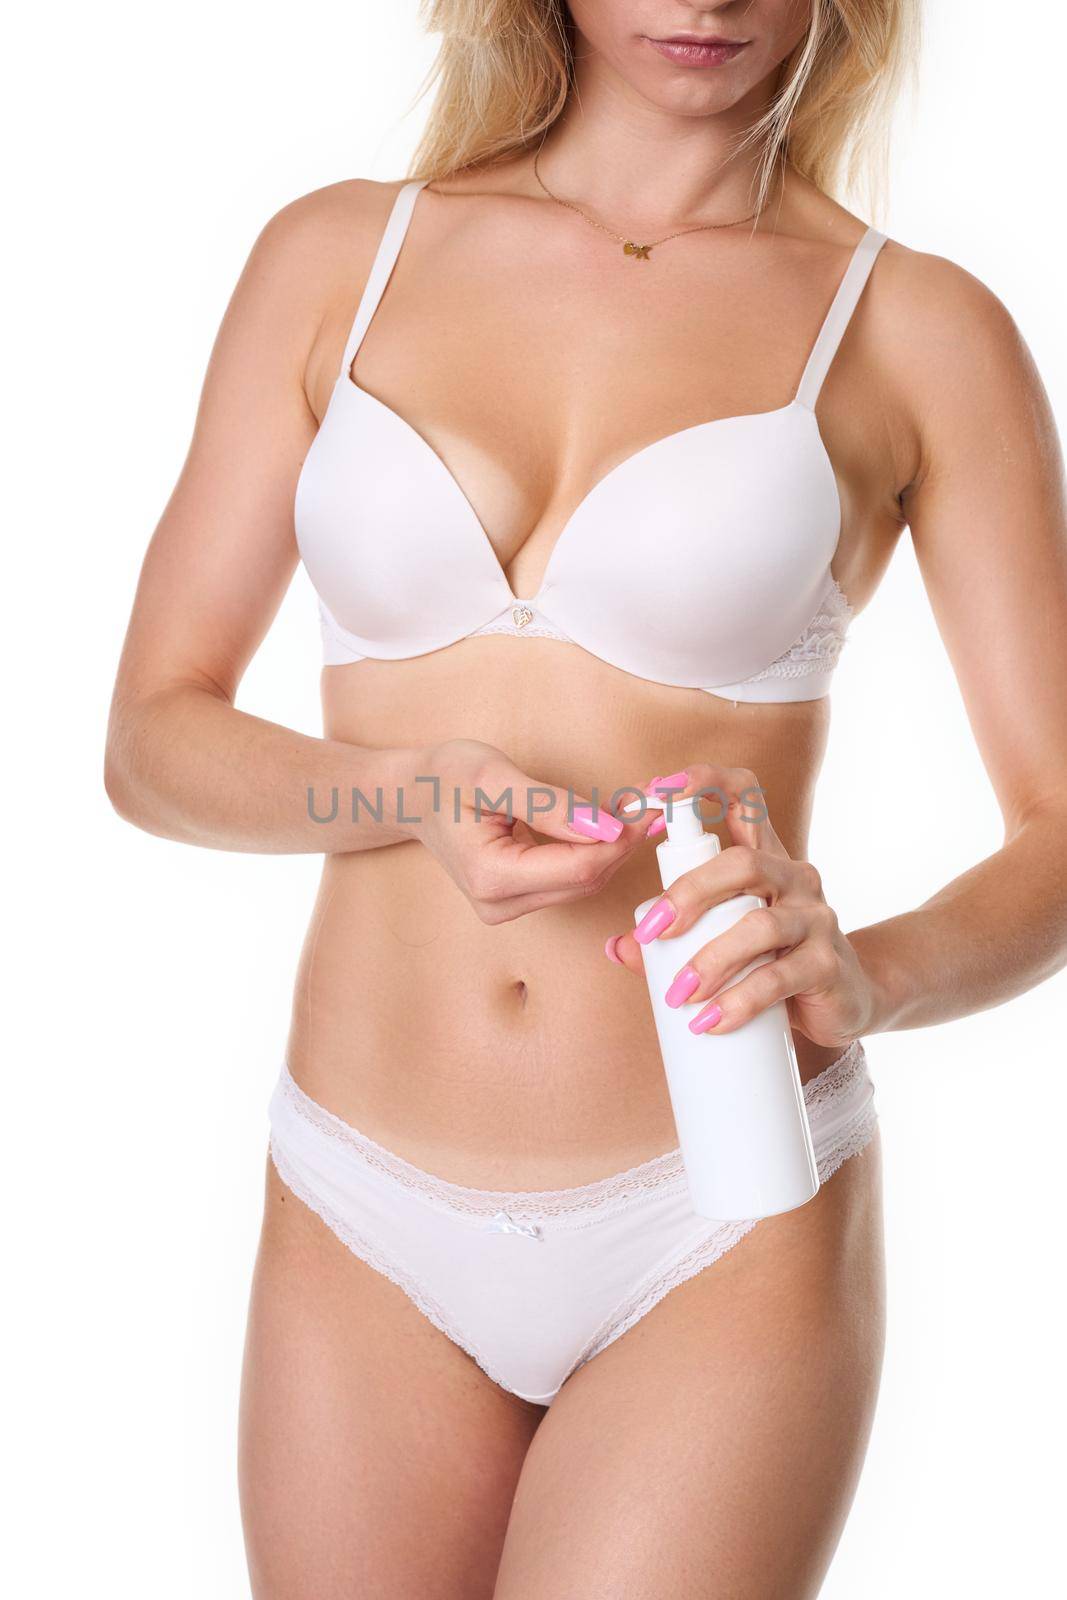 a woman with blonde hair poses in white lingerie and uses a body lotion. Photo taken in the studio. photo on a white background